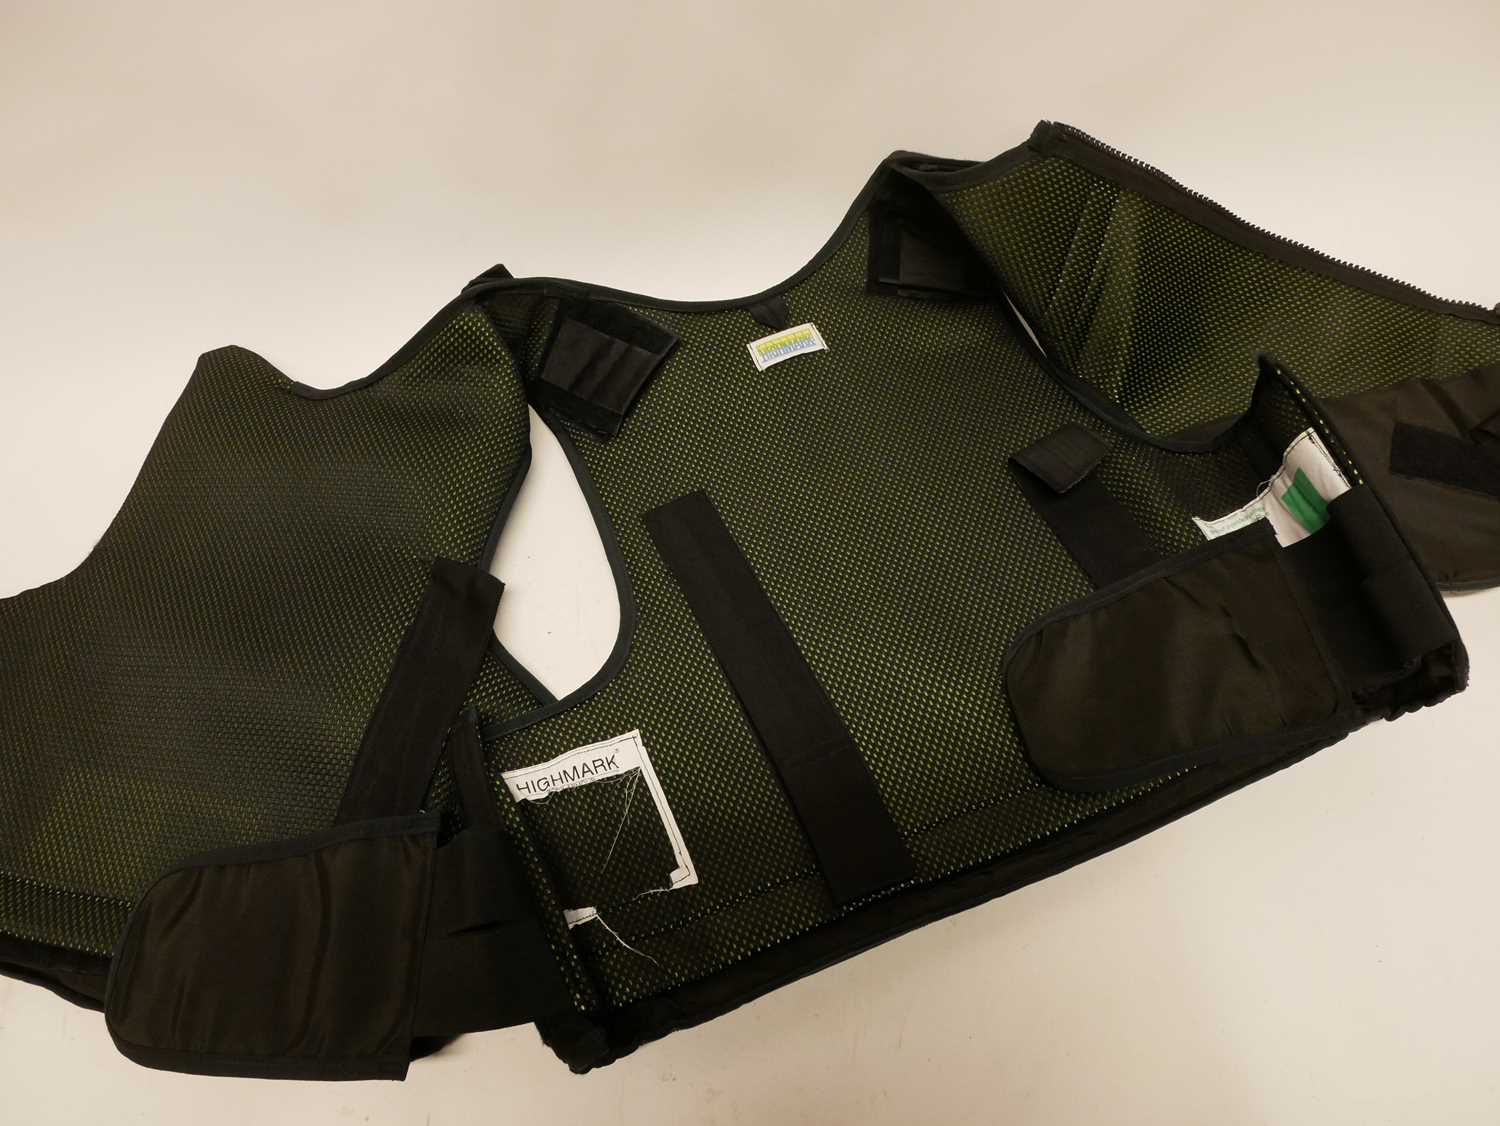 Highmark dual-purpose (ballistic & stab protection) body armour in carrying bag. - Image 5 of 9